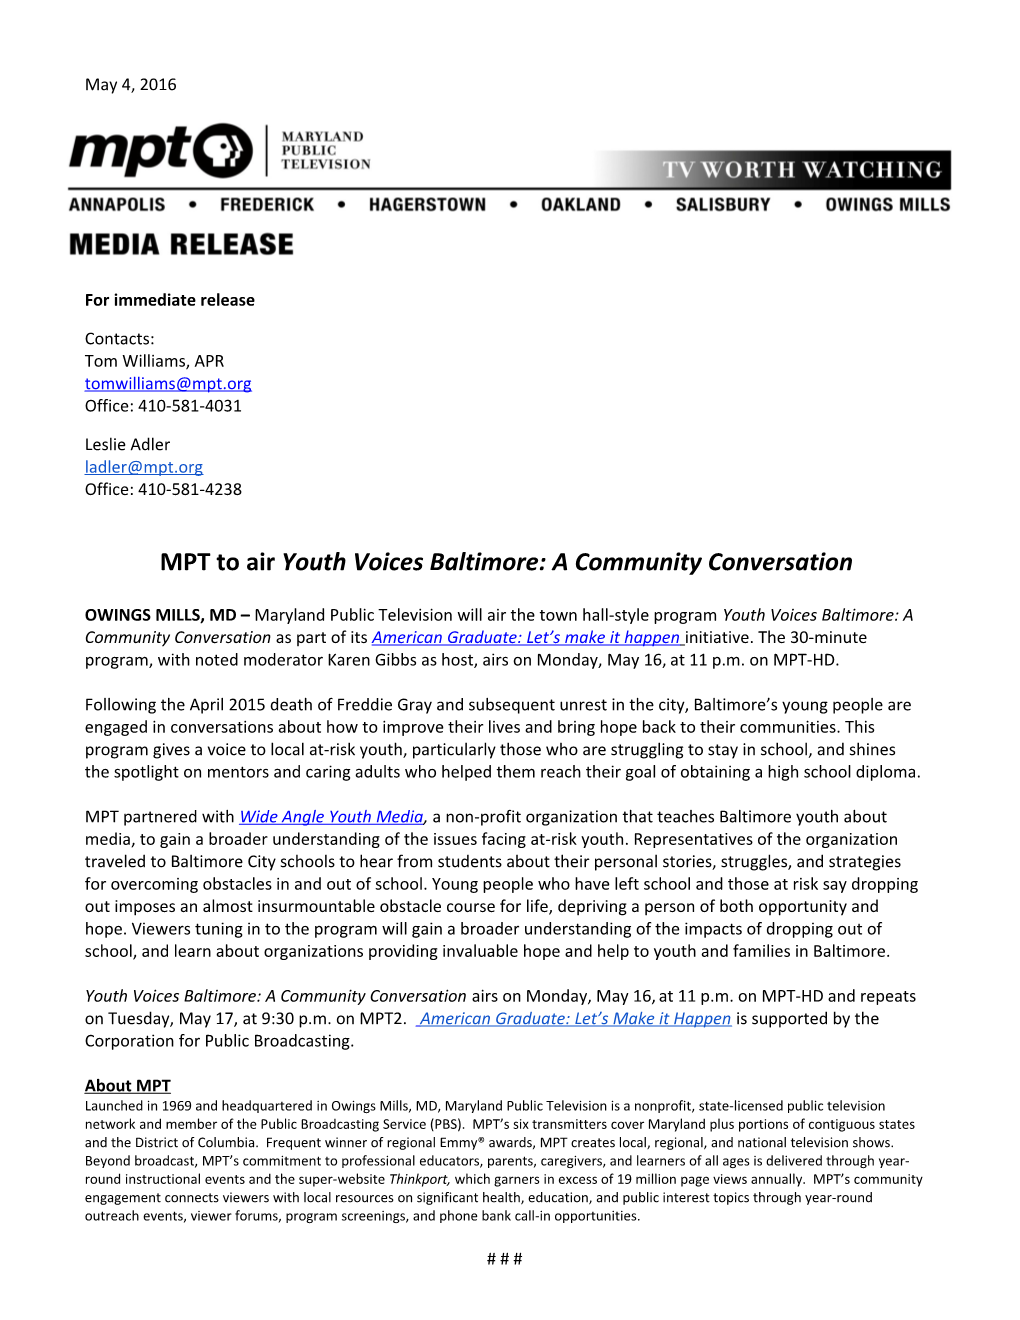 MPT to Air Youthvoicesbaltimore:Acommunityconversation